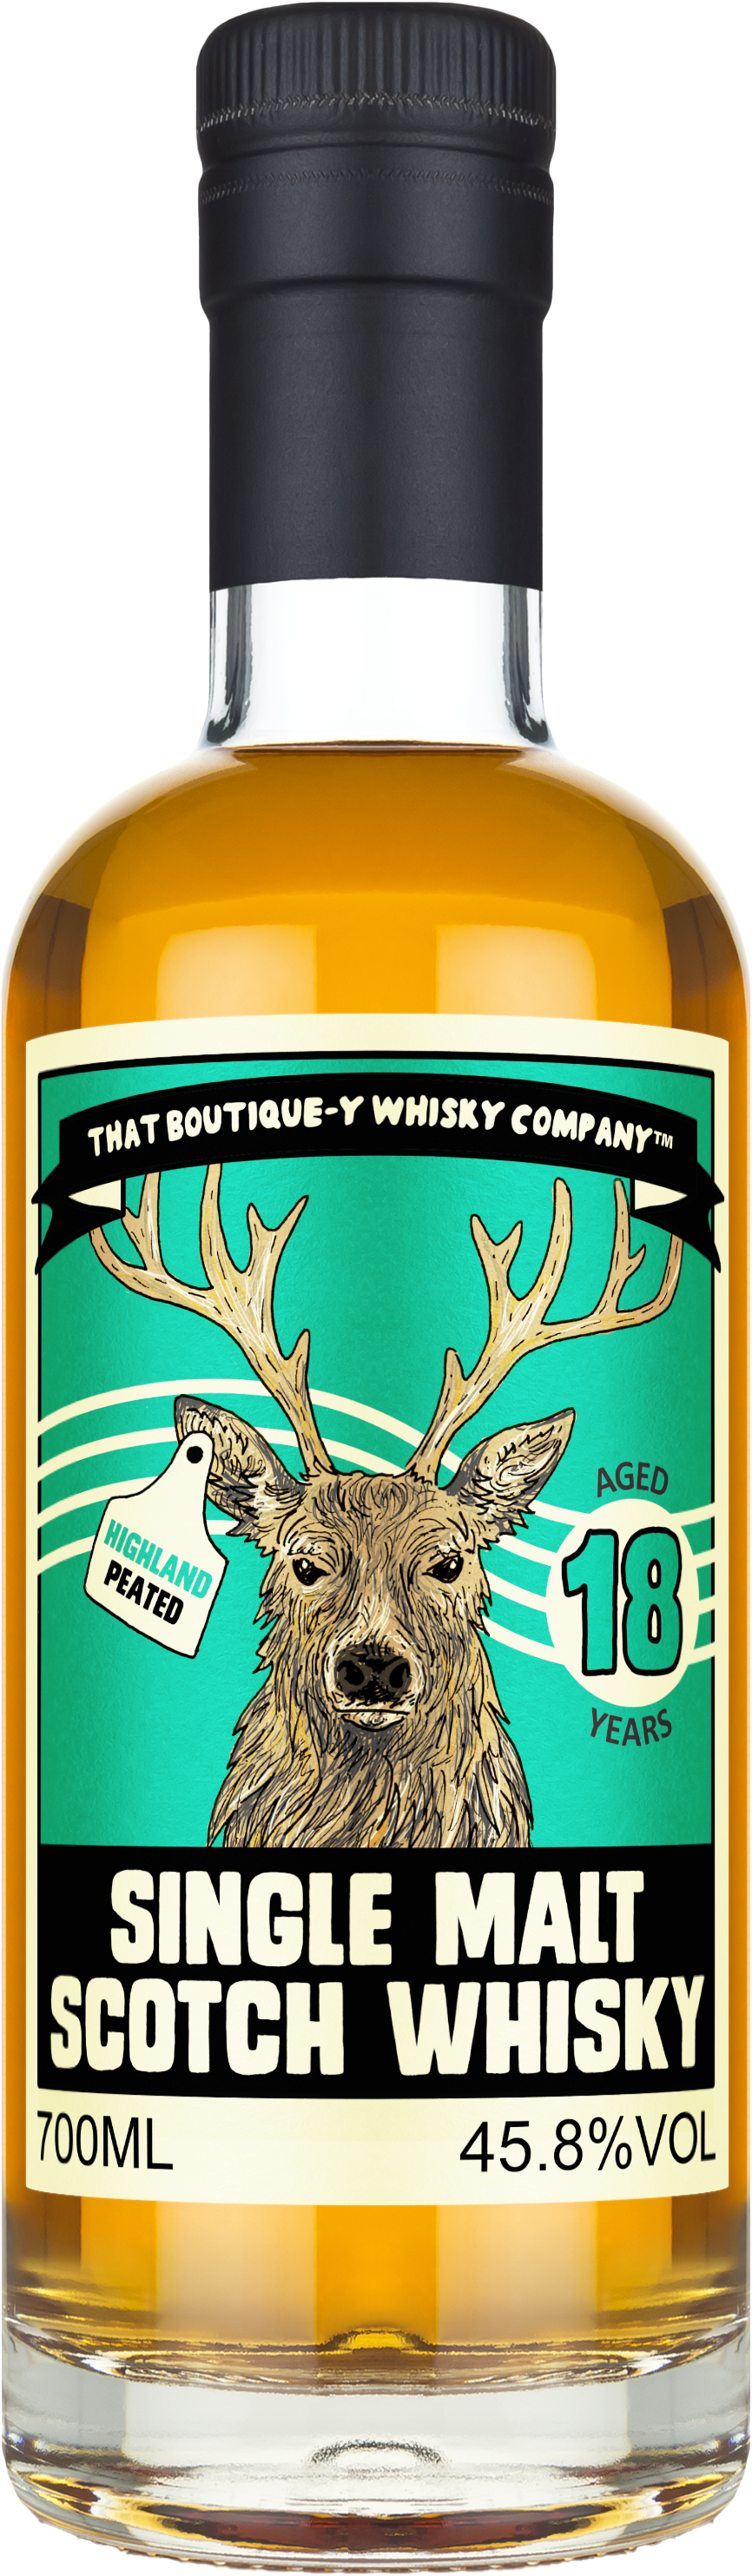 That Boutique-Y Whisky Company 18 Year Old Peated Highland Single Malt Scotch Whisky 700ml